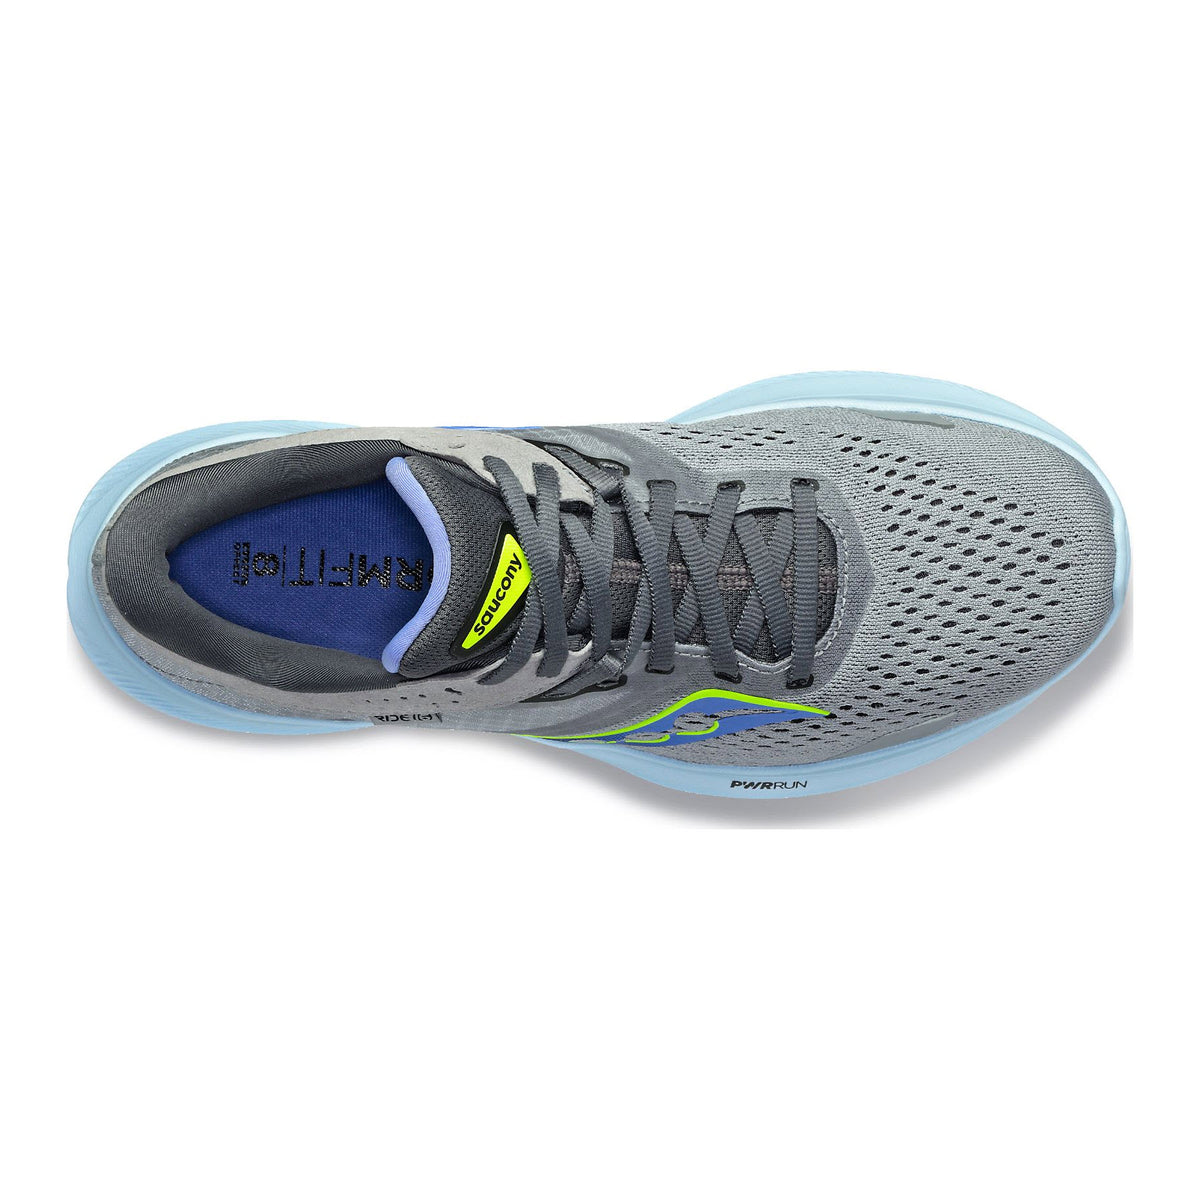 Top view of a single grey Saucony Ride 16 Fossil/Pool running shoe with a blue insole and laces, featuring a breathable mesh design and black accents.